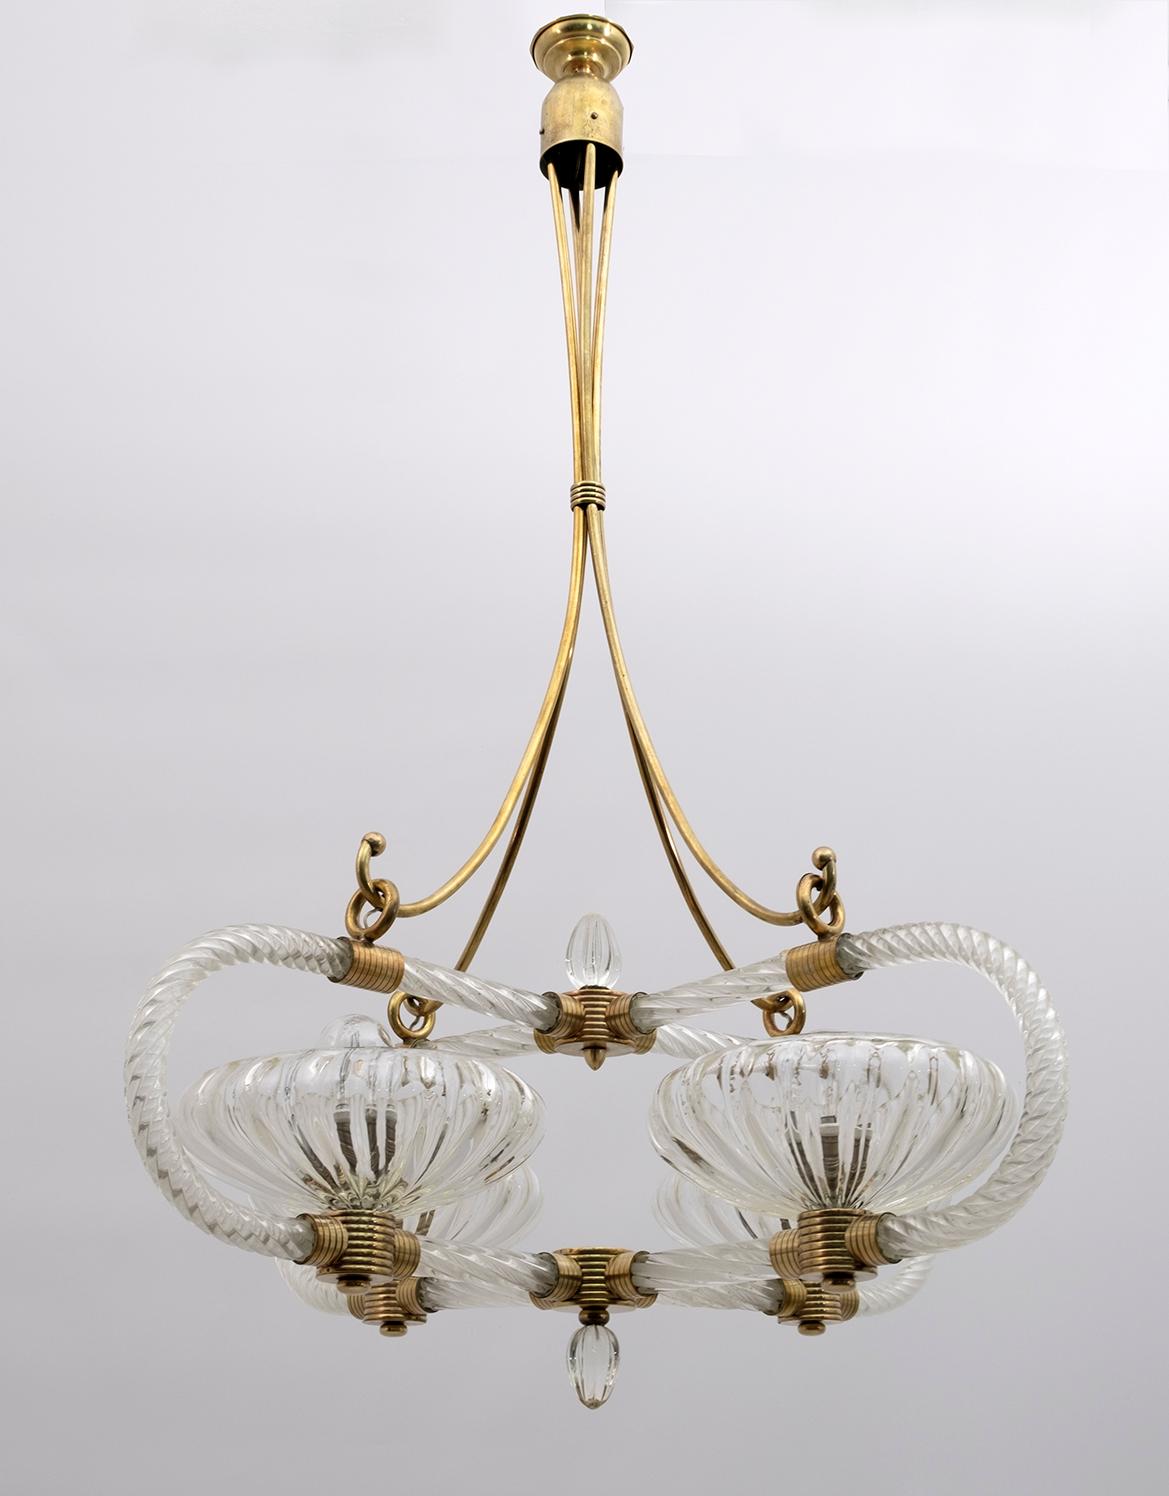 This chandelier, designed and produced by Ercole Barovier in the 1930s, is made of Murano glass, torchon arms and brass, the brass part has been polished, the chandelier mounts 4 lamp holders with E27 fitting

The Barovier artistic glass factory